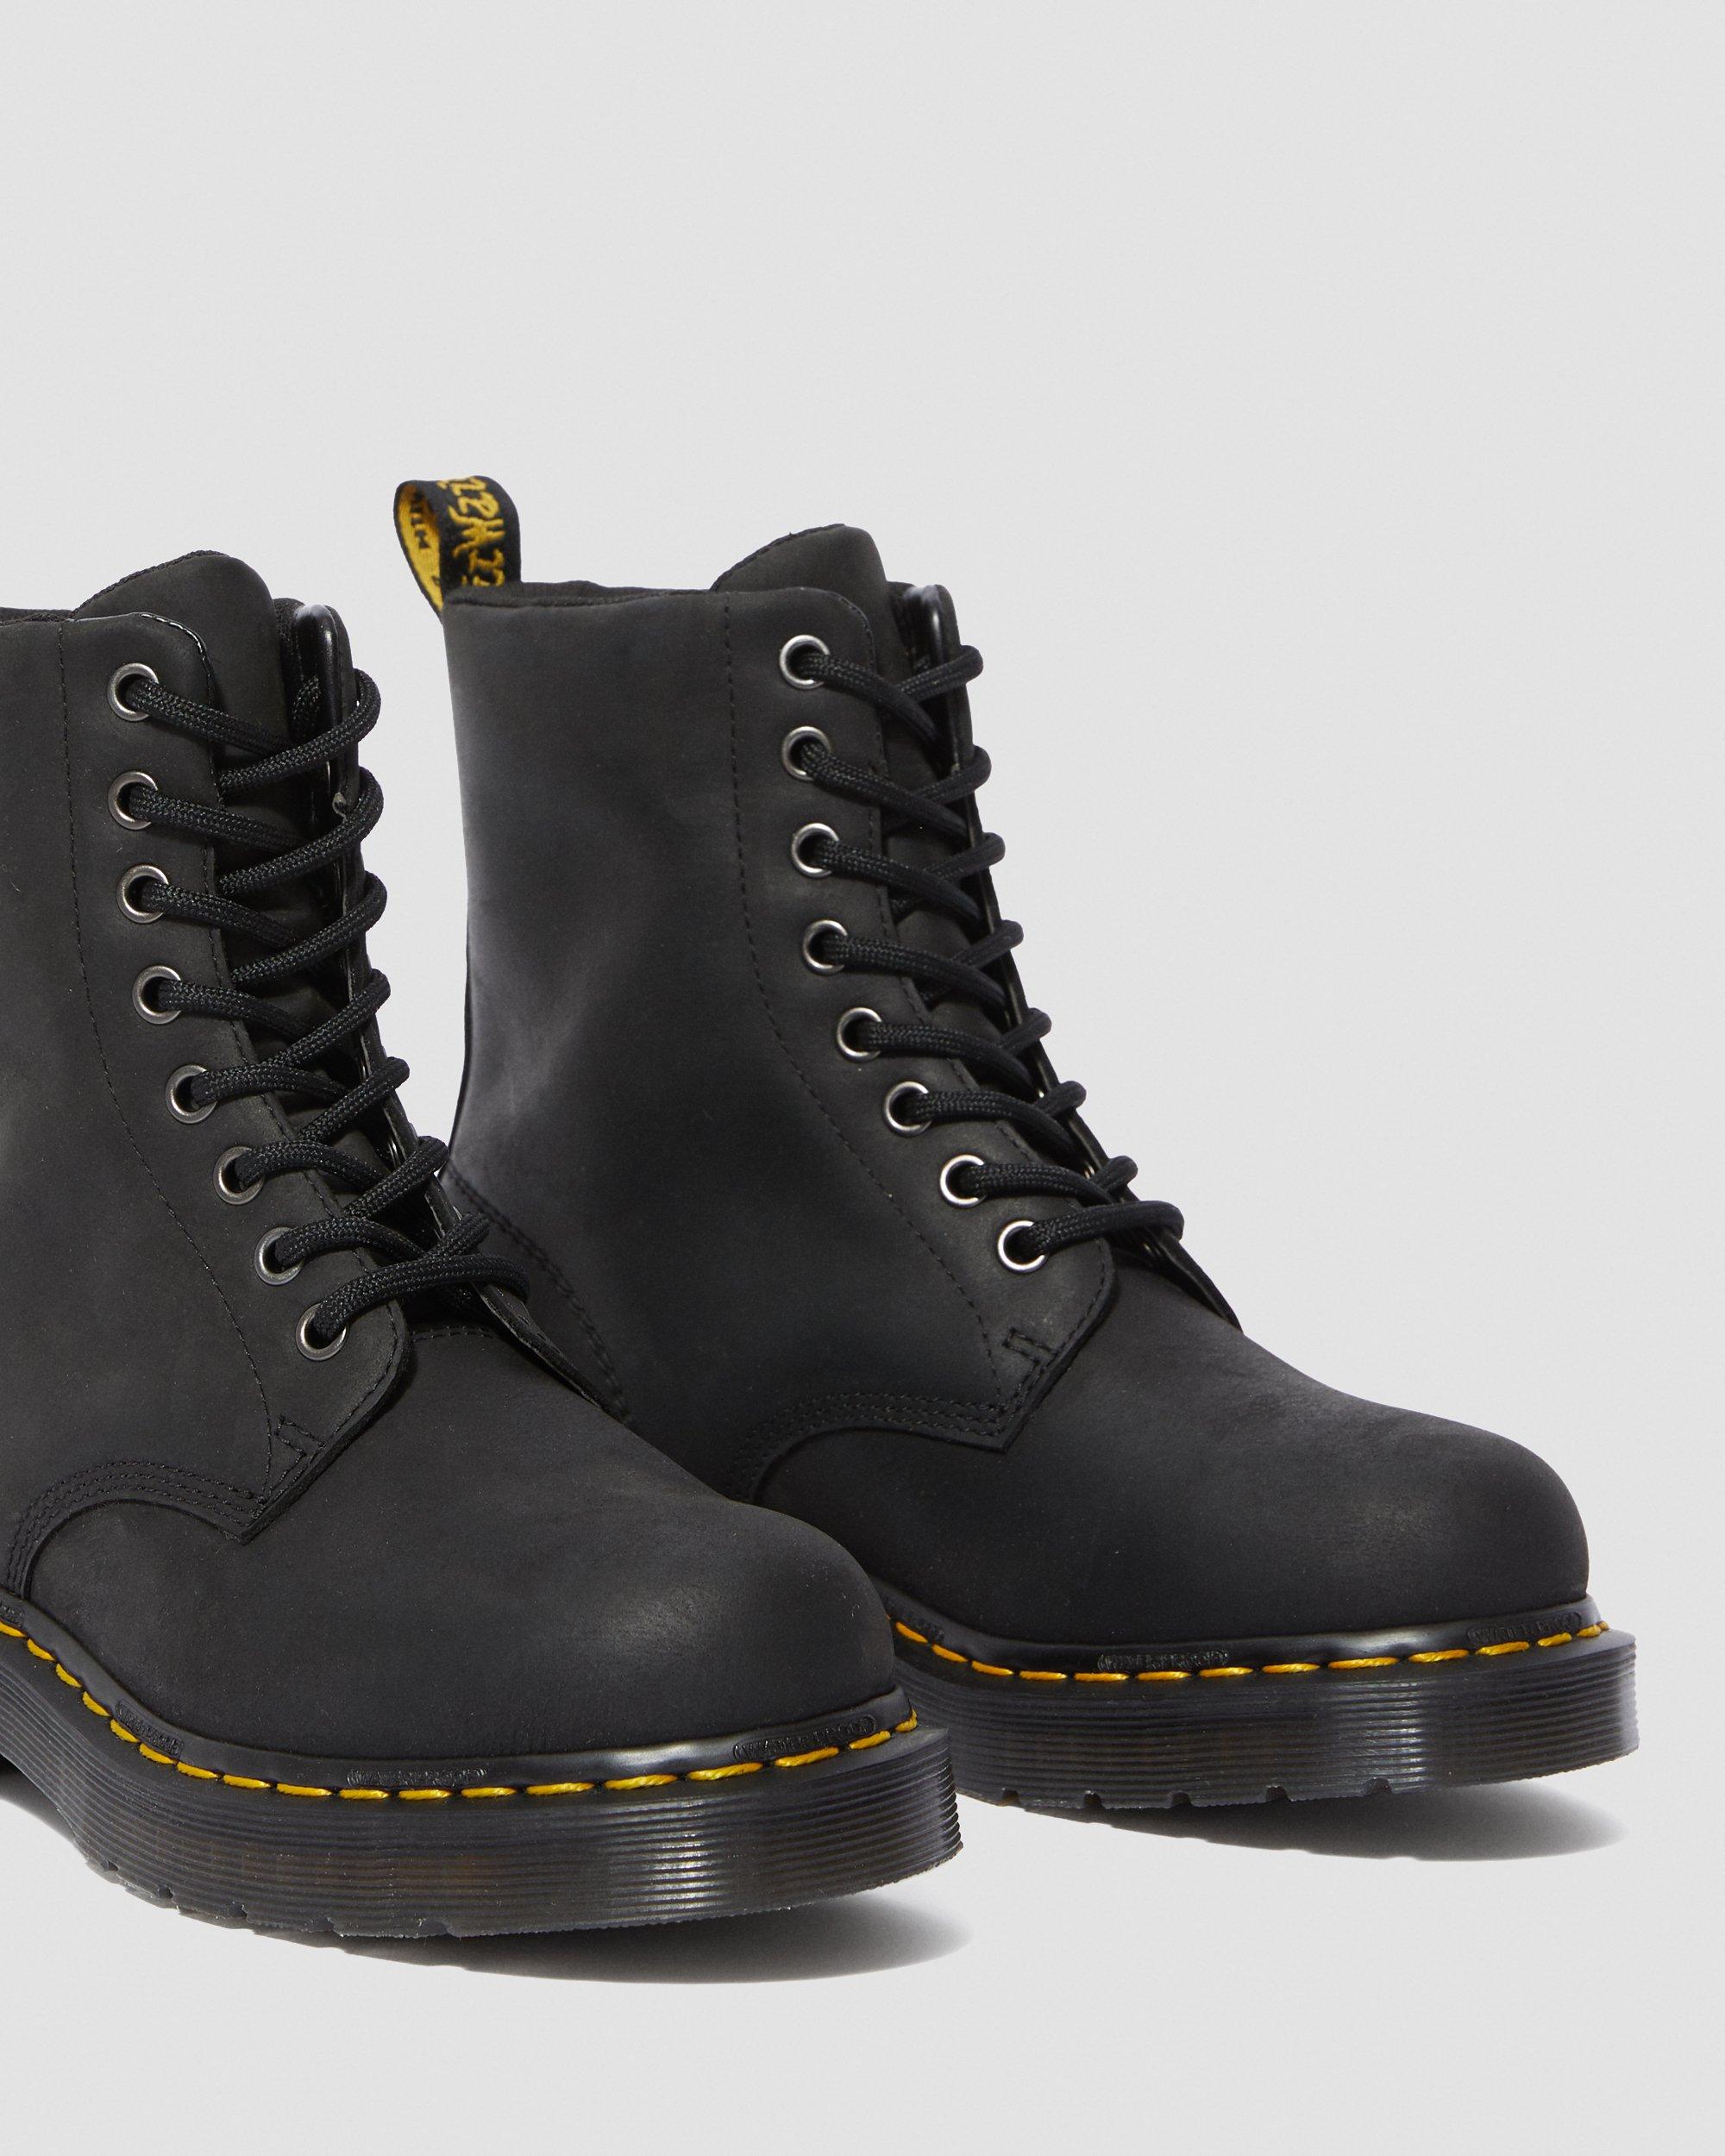 WATERPROOF ANKLE BOOTS | Dr. Martens UK